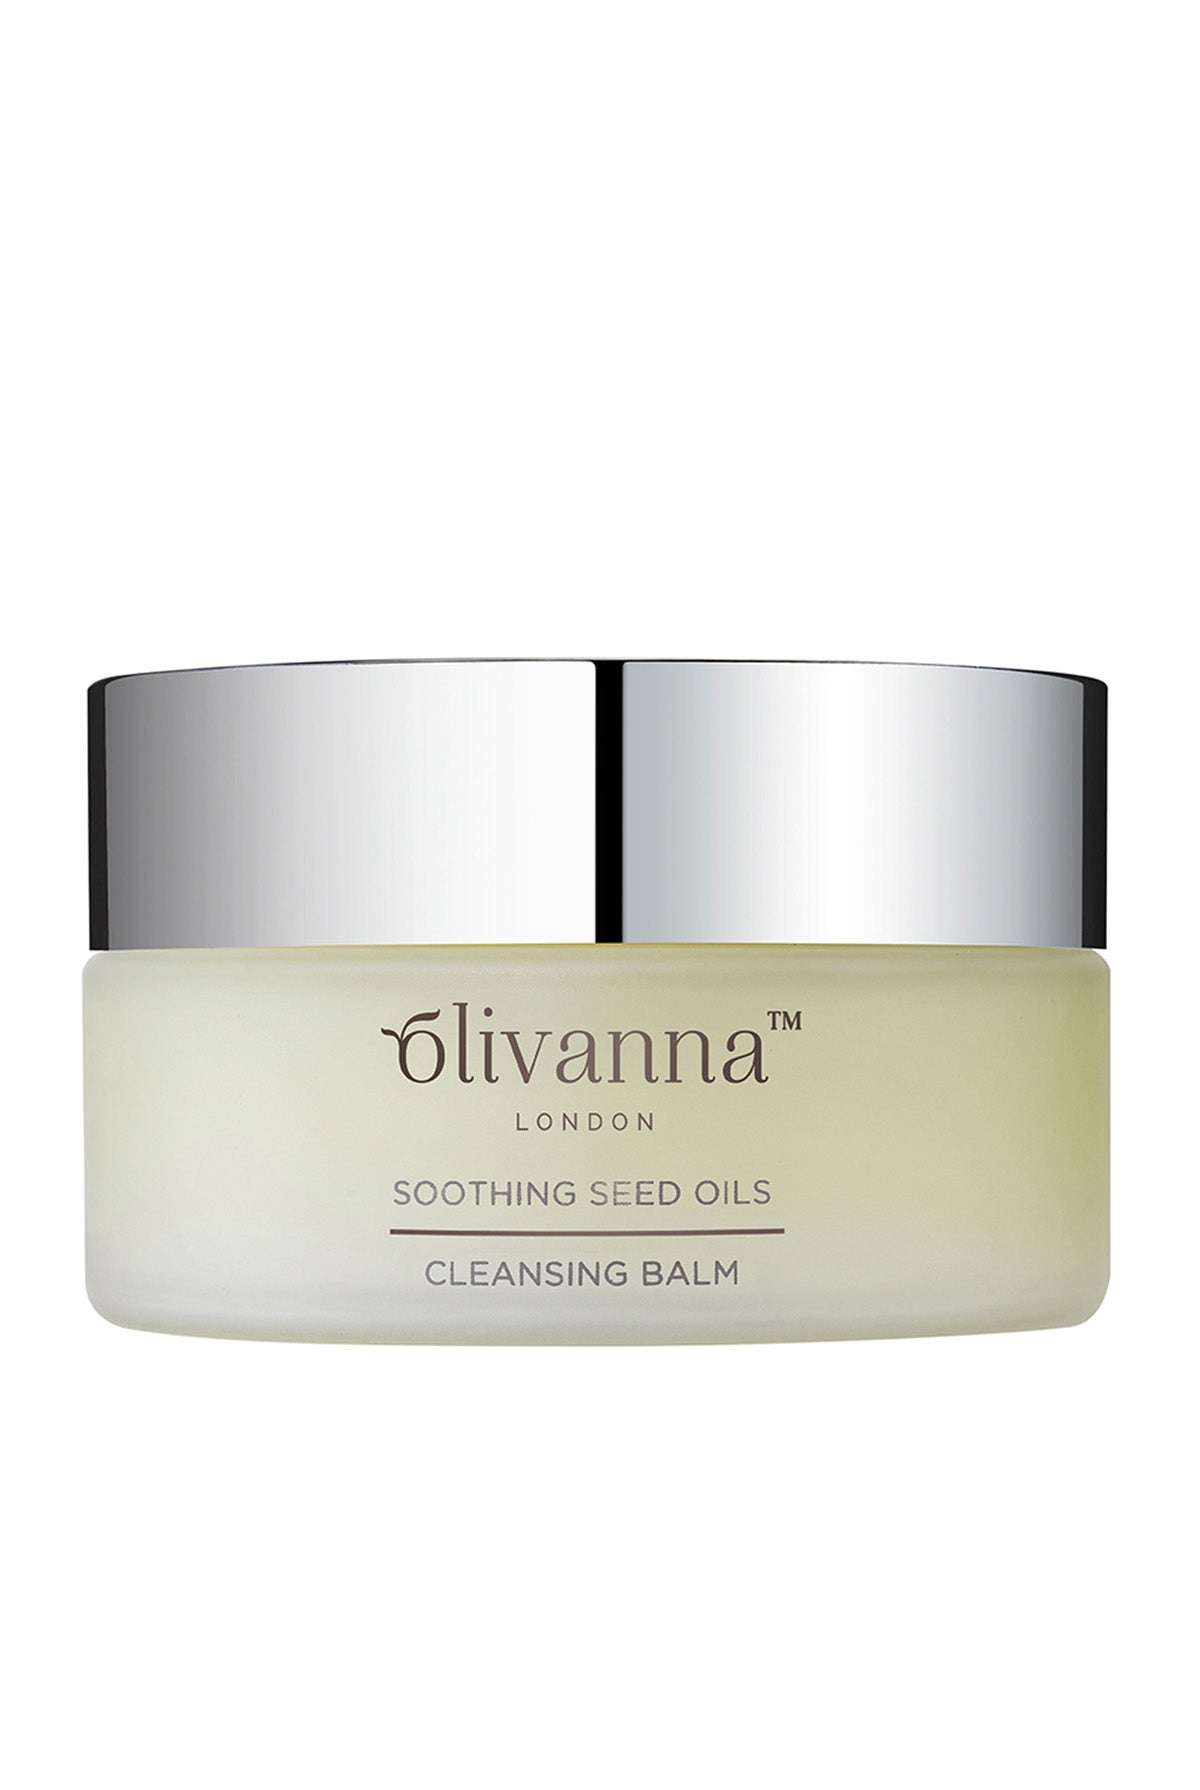 Image of Soothing Seed Oils Cleansing Balm 